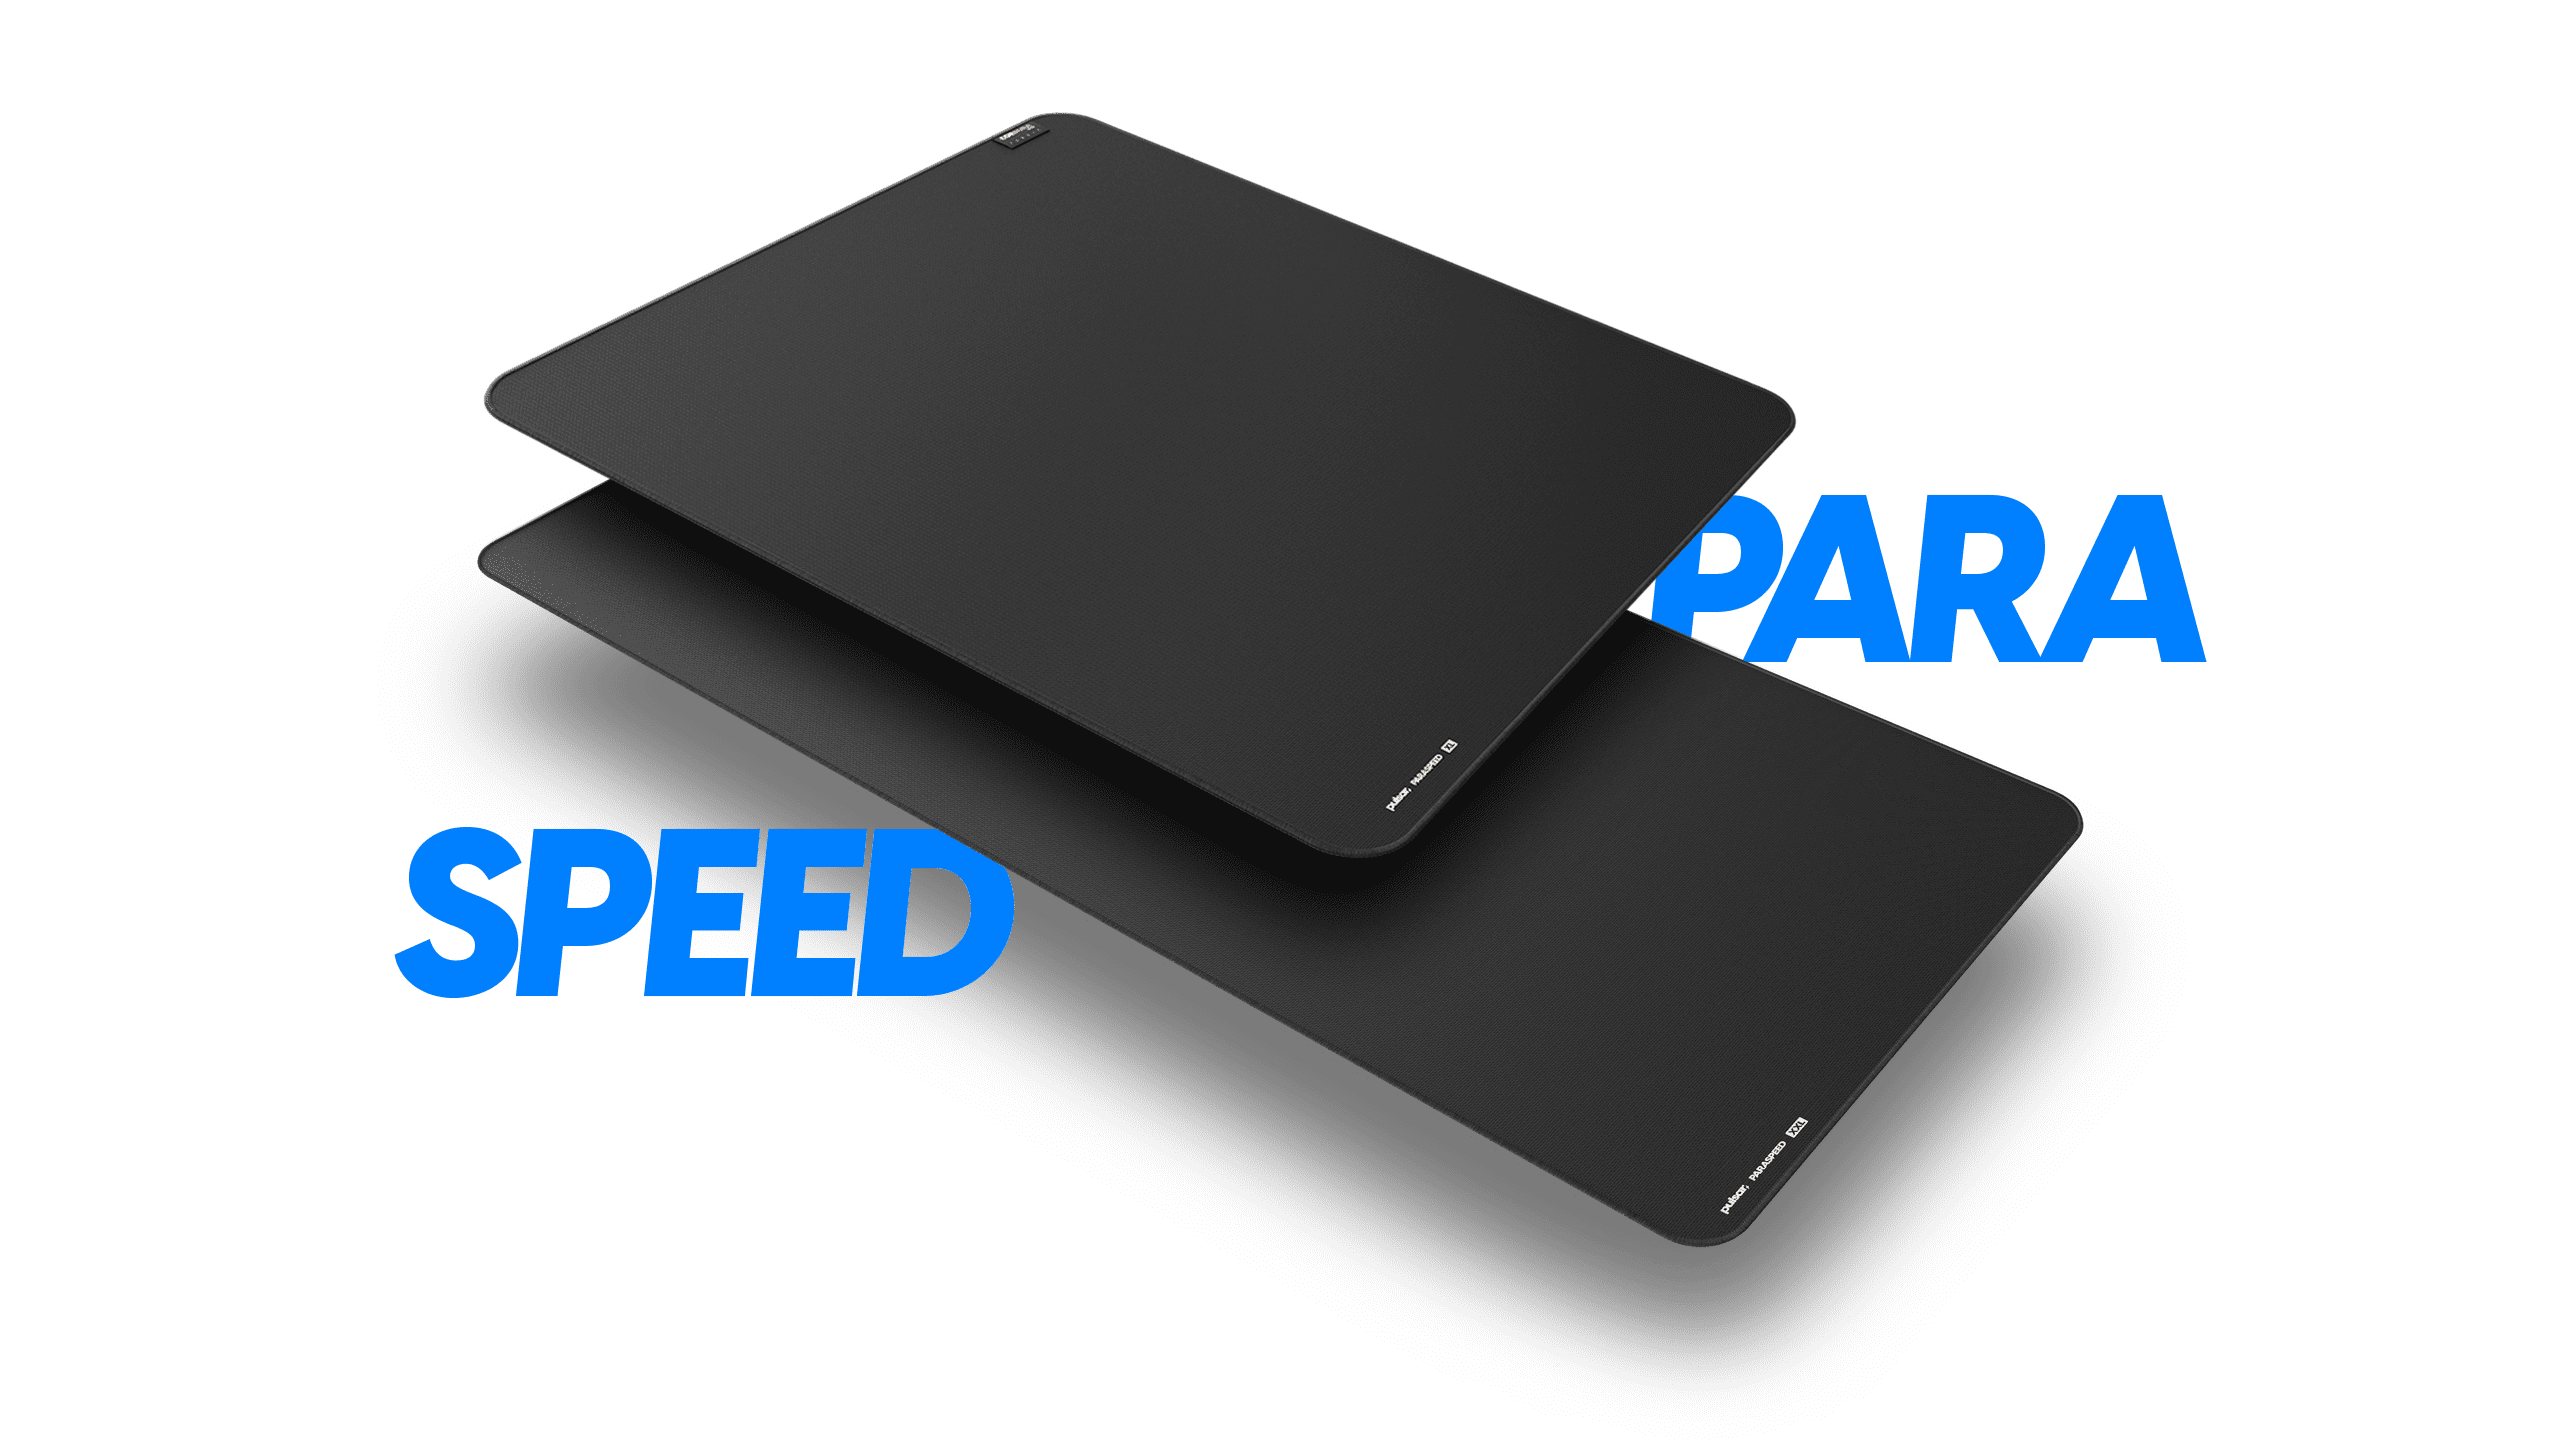 ParaSpeed Mouse Pad XL~XXL (High Speed) – Pulsar Gaming Gears